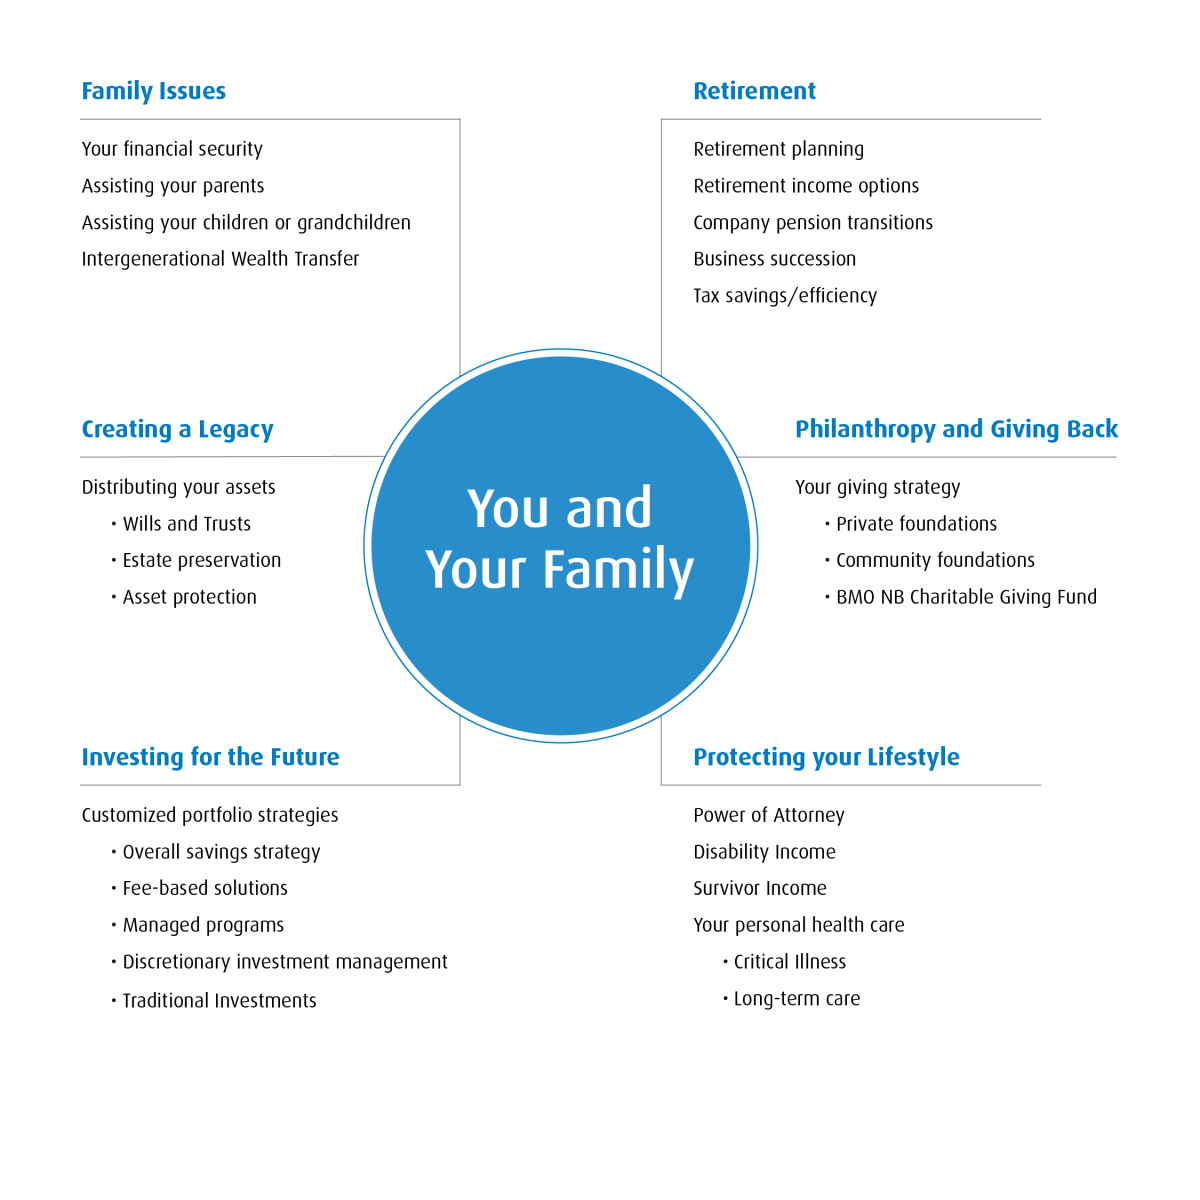 bubble chart of your and your family, extending out to list issues a financial advisors can assist with: family issues, retirement, creating a legacy, philanthropy, investing for the future, and protecting your lifestyle